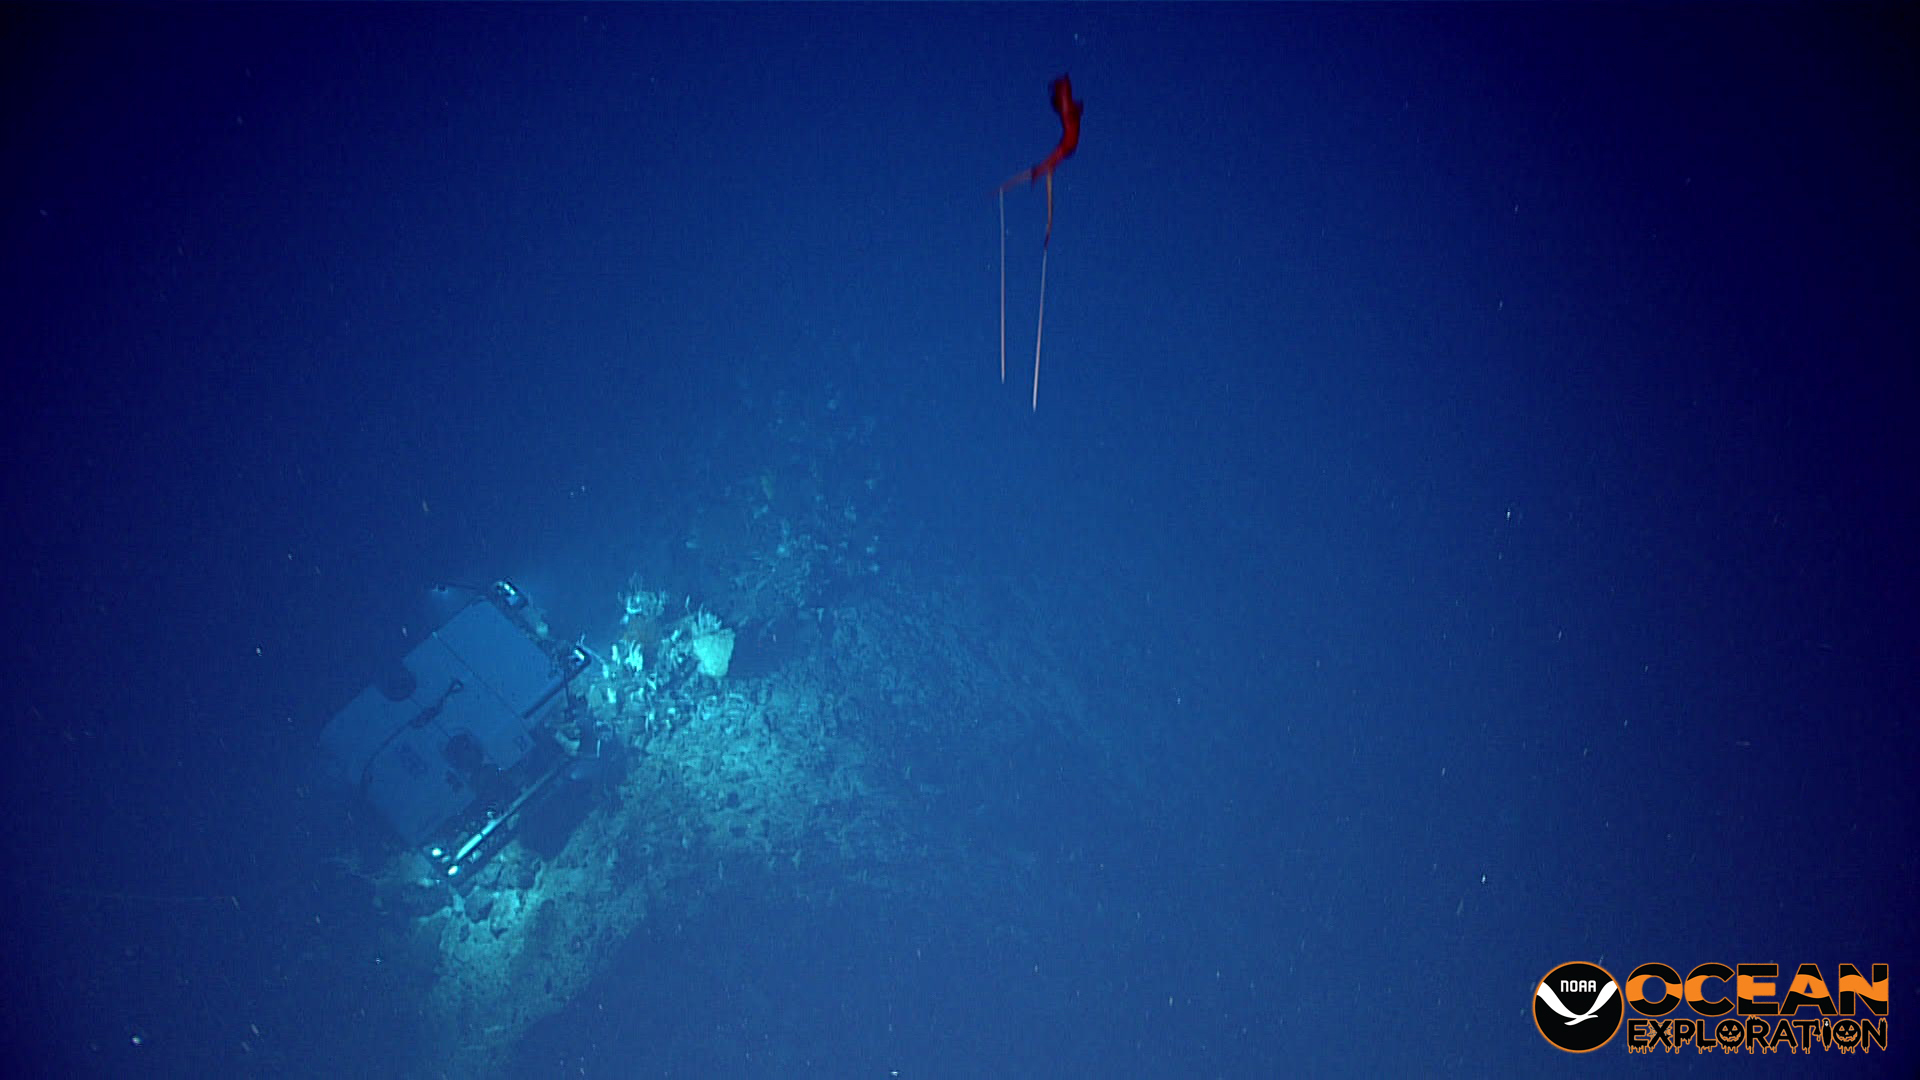 As remotely operated vehicle (ROV) Deep Discoverer is investigating the seafloor, ROV Seirios “watches” from above, catching glimpses of things we'd otherwise miss, such as a whiplash squid (left) and a rather large fish (right), both observed during the second Voyage to the Ridge 2022 expedition.